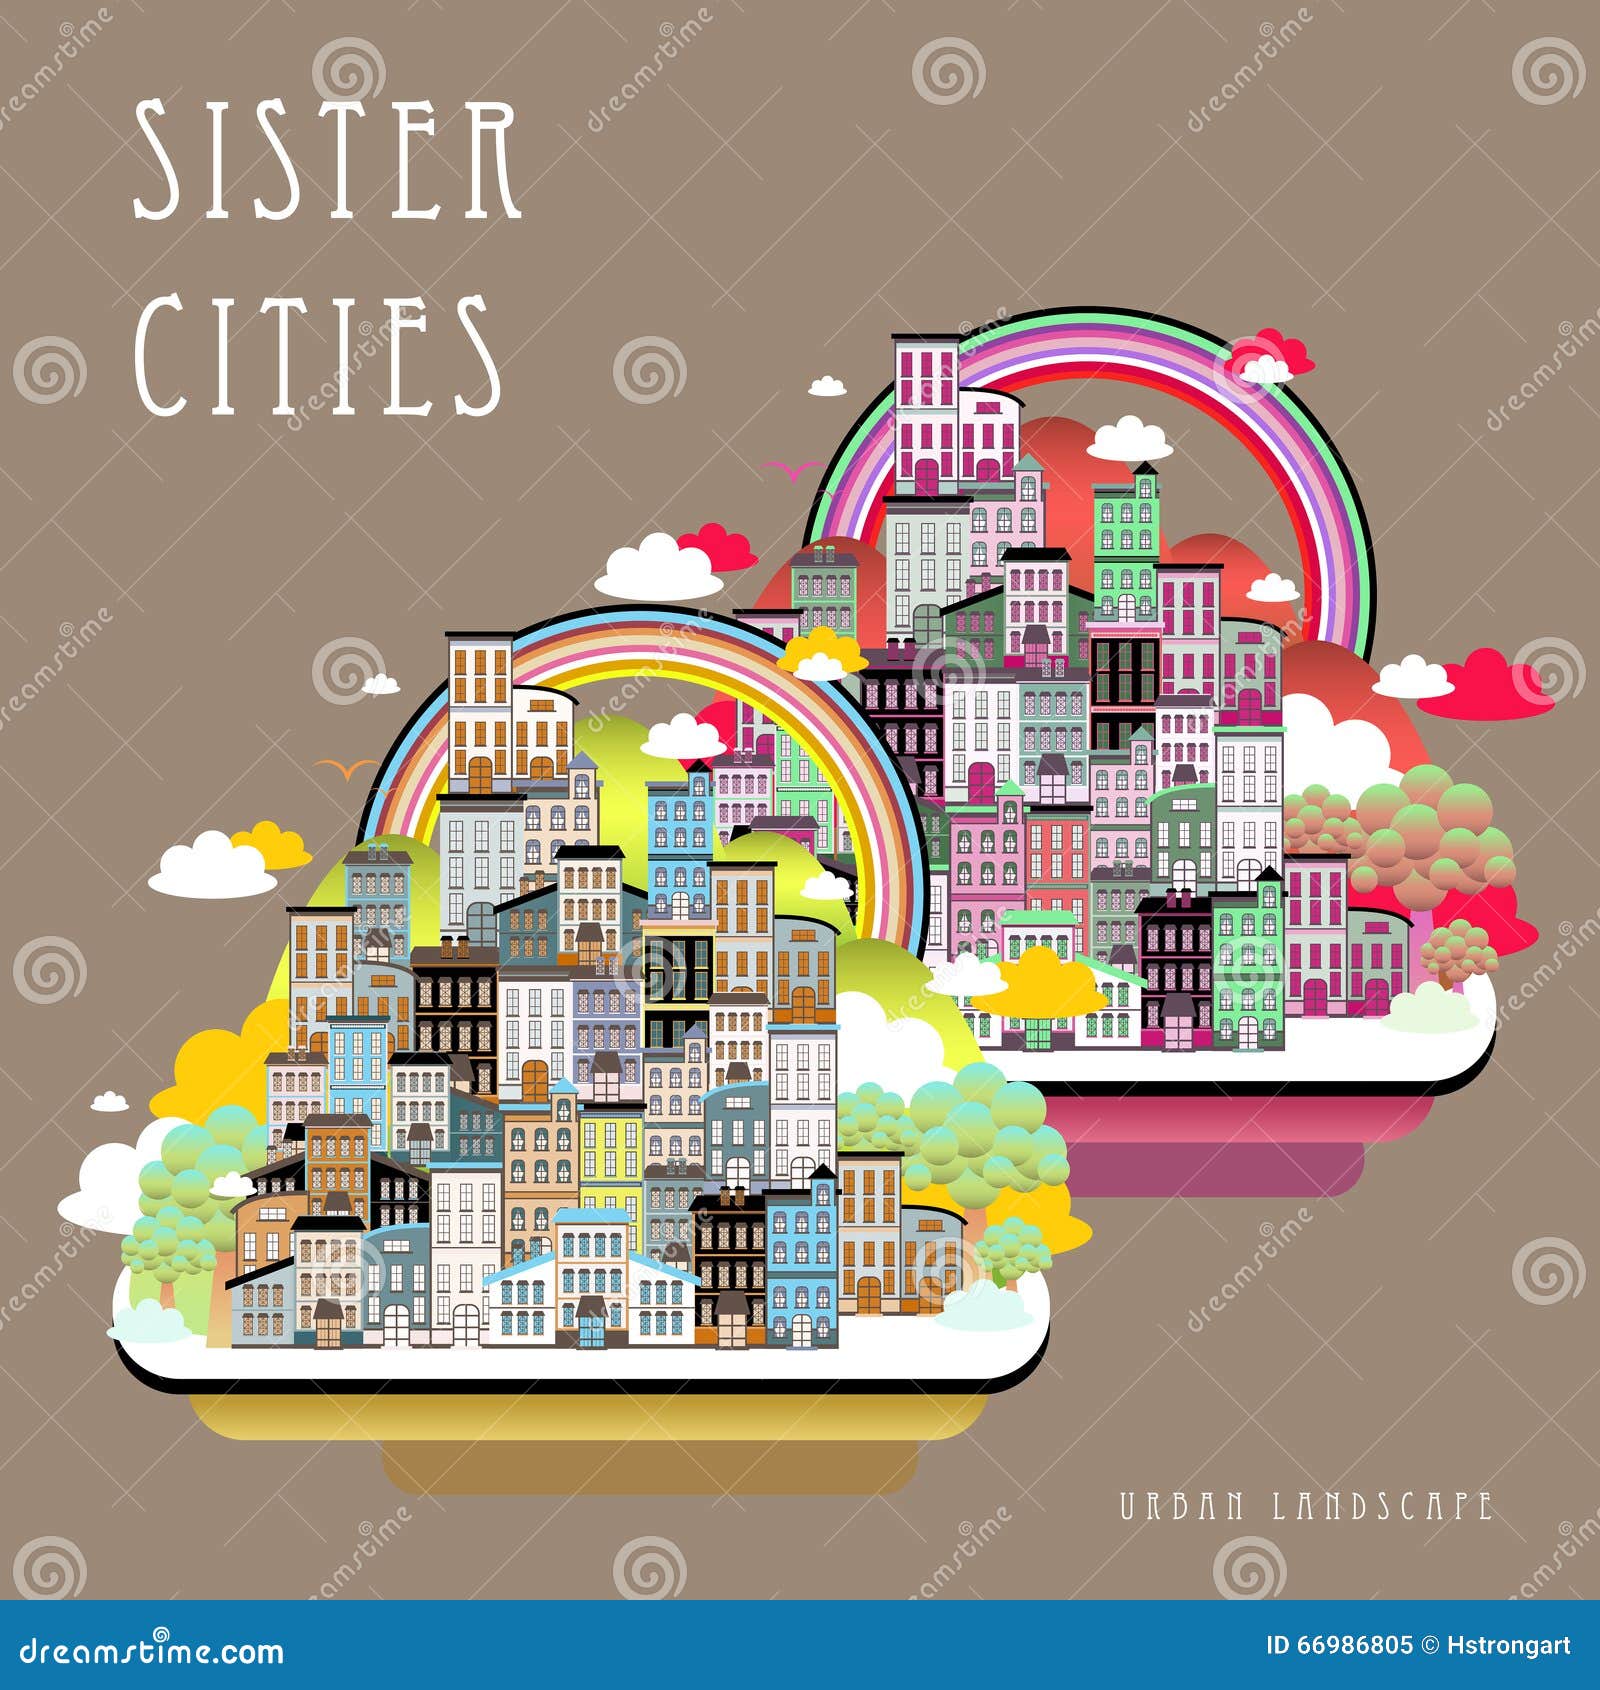 Sister cities